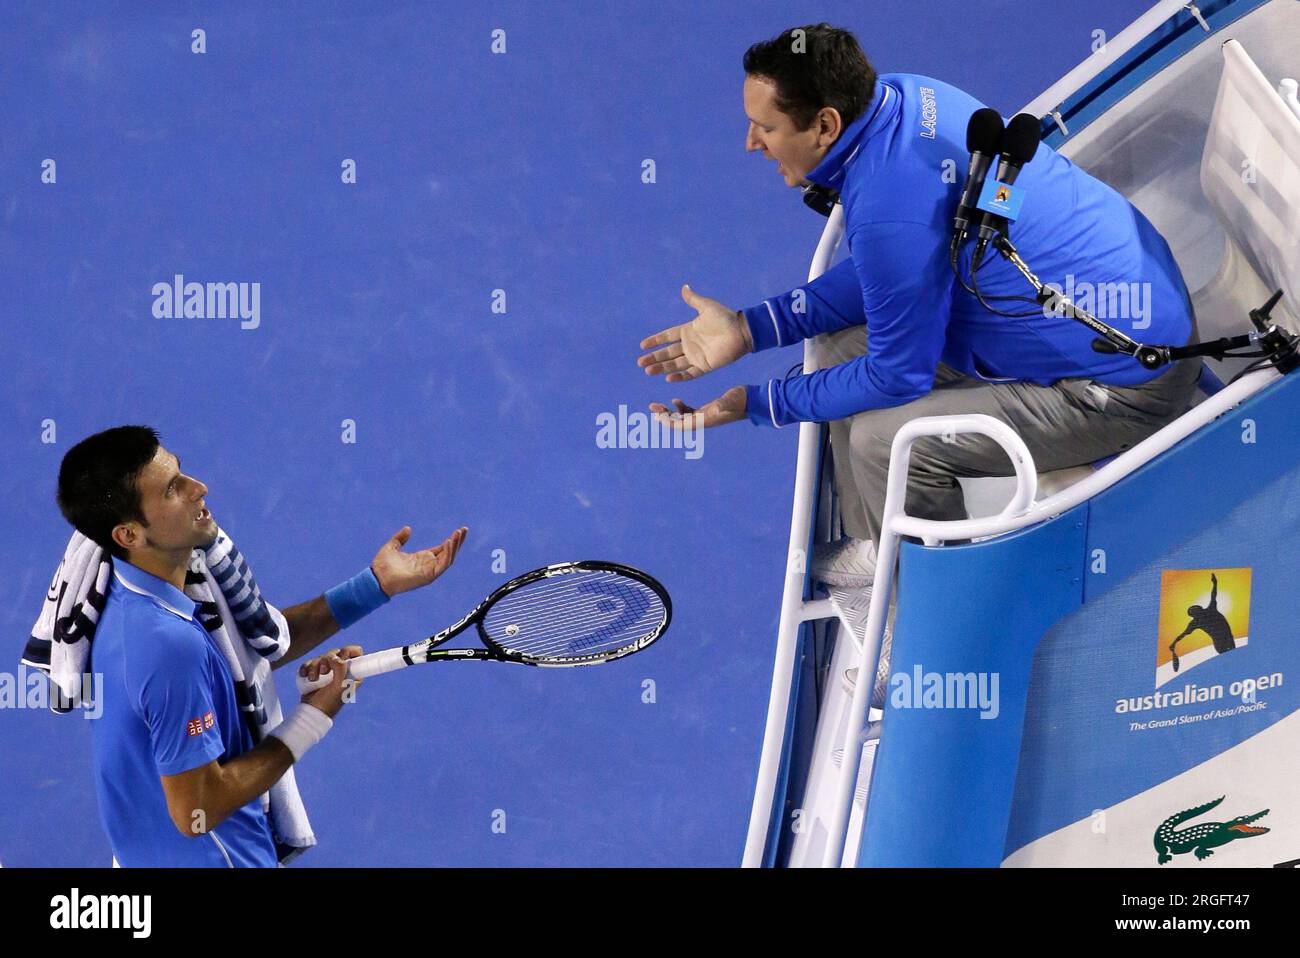 FILE - Novak Djokovic of Serbia, left, talks with chair umpire Jake Garner  of the U.S. as he plays Andy Murray of Britain during the men's singles  final at the Australian Open